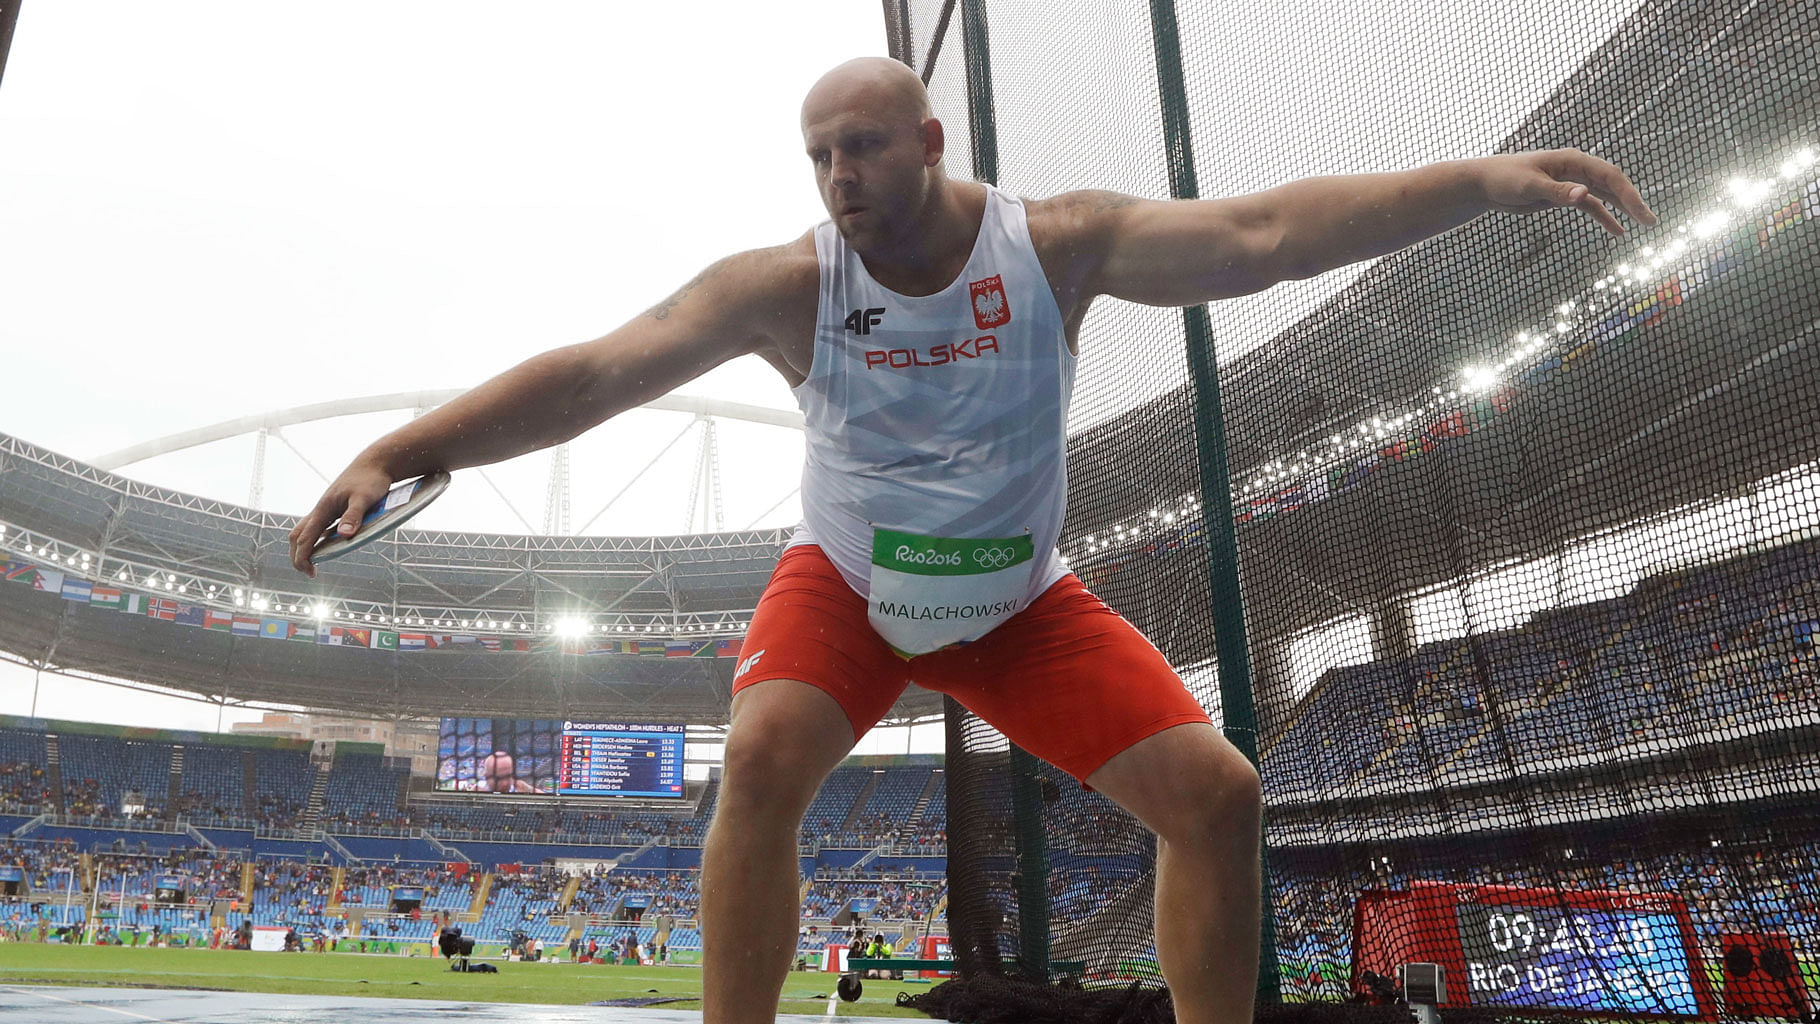  Poland’s Piotr Malachowski competes in a qualifying round of the men’s discus throw during the athletics competitions of the 2016 Rio Olympics. (Photo: AP)